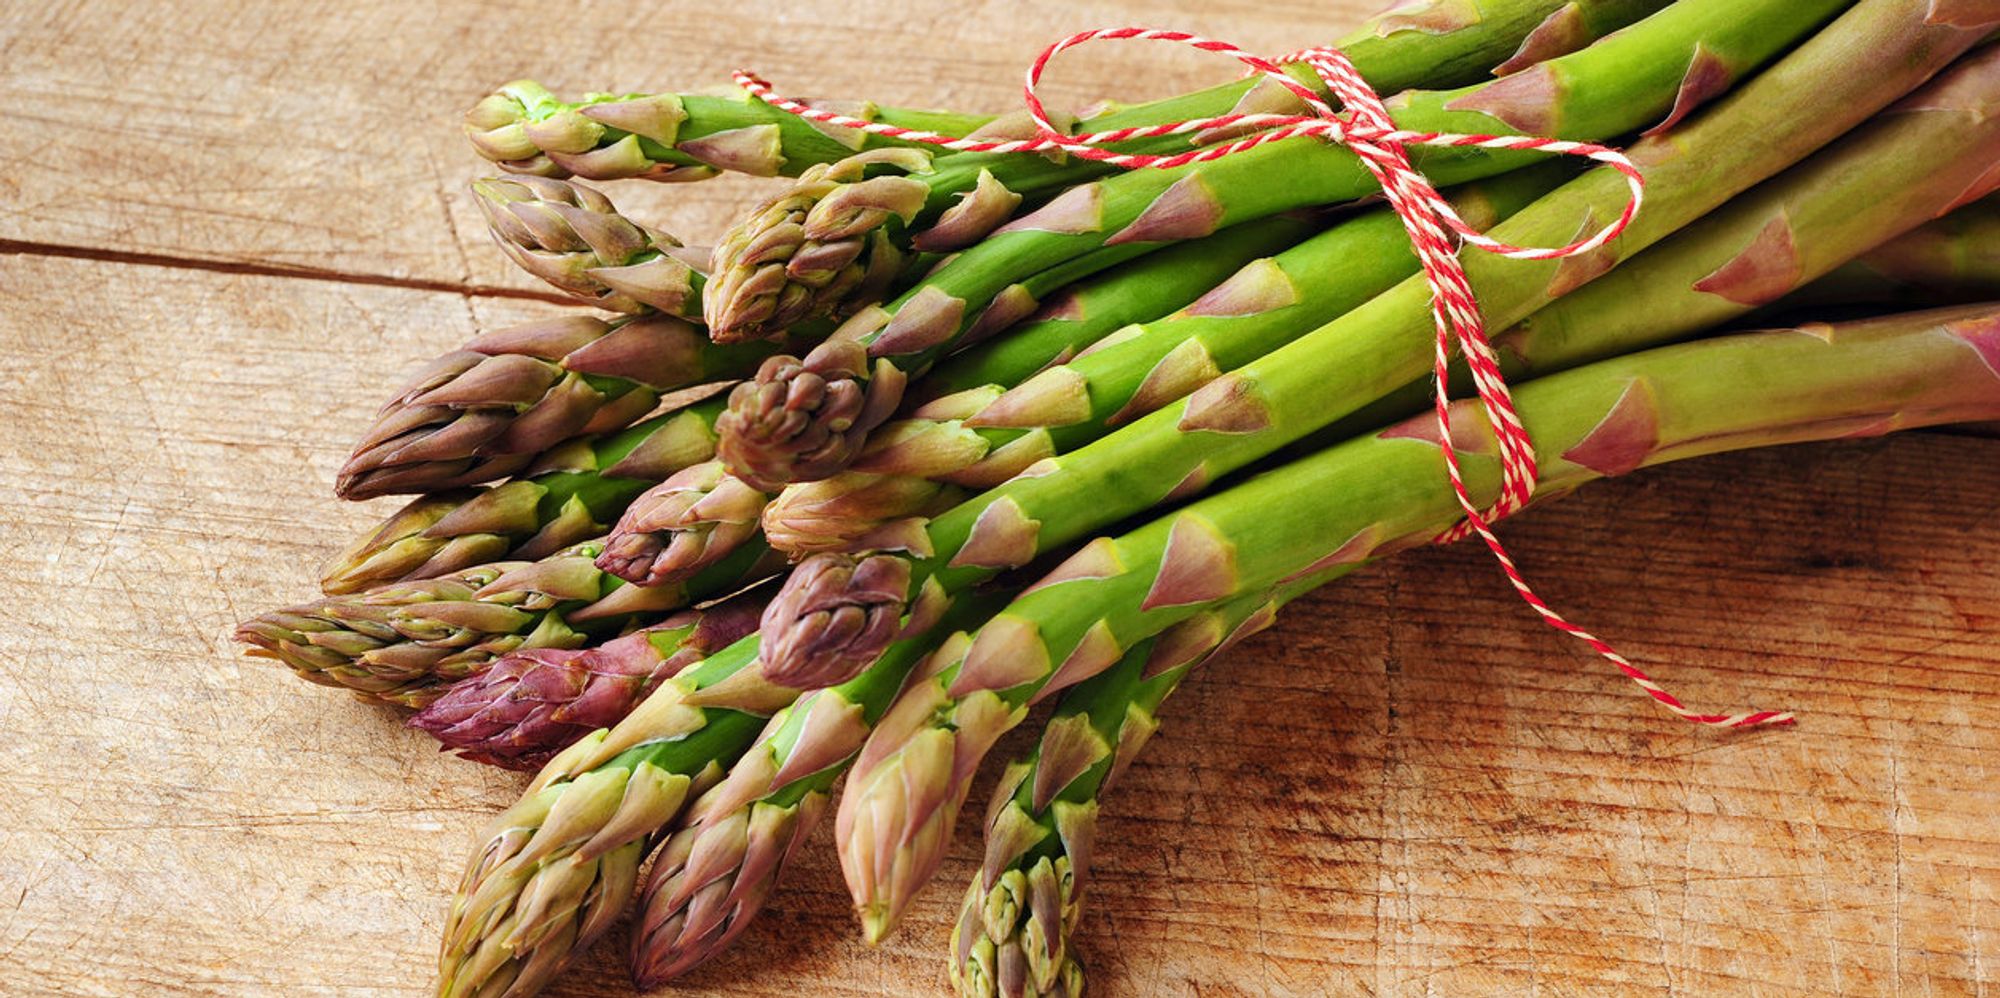 This Is Why Your Wee Smells After Eating Asparagus | HuffPost UK